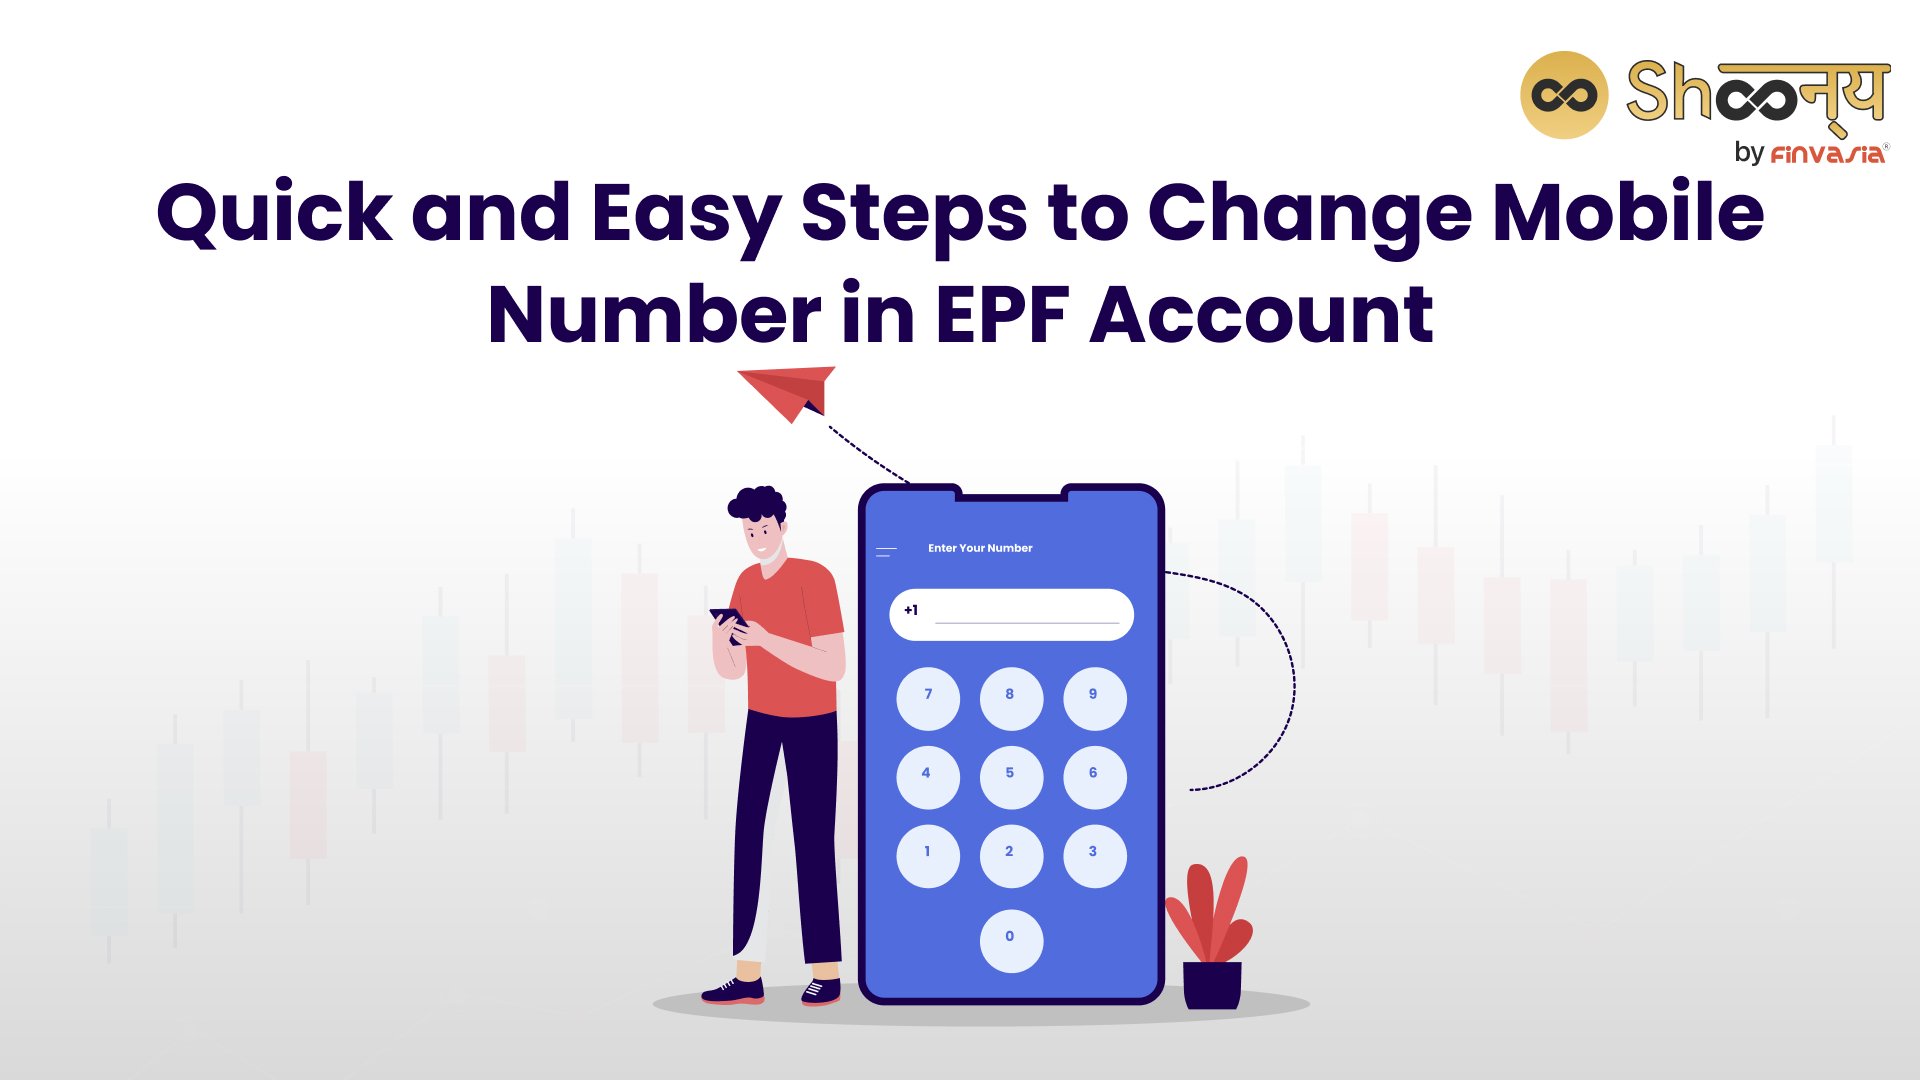 EPFO Mobile Number Change: A Step-by-Step Guide